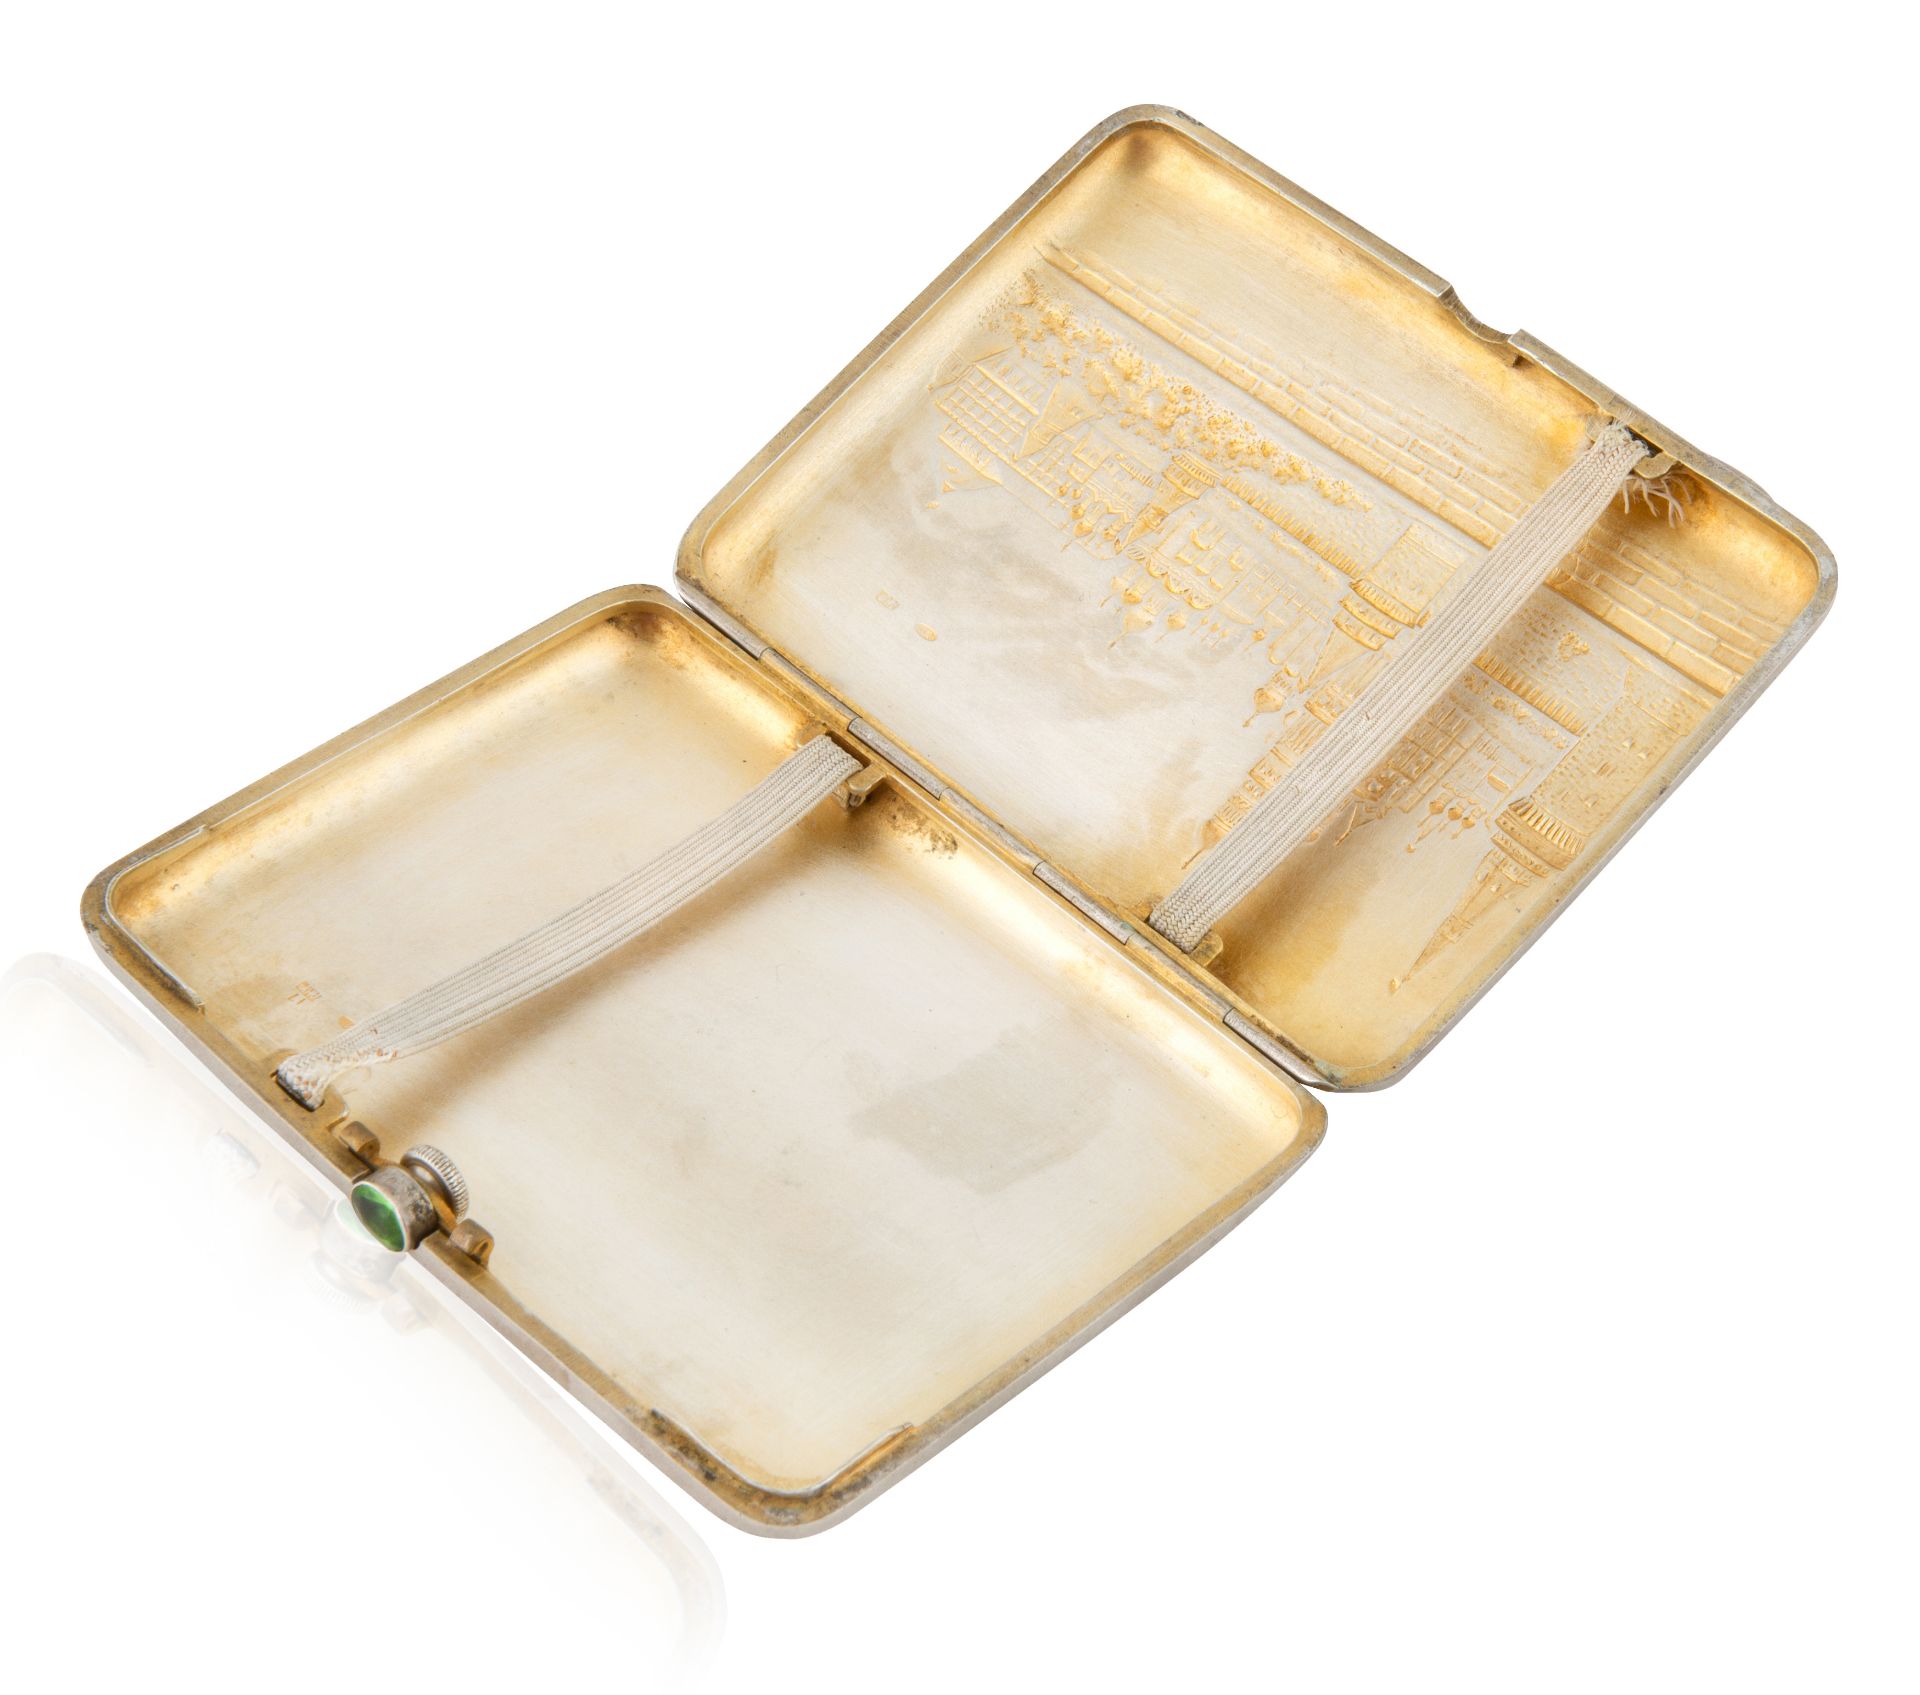 A PAIR OF SOVIET SILVER CIGARETTE CASES, MOSCOW, AFTER 1927 - Image 4 of 5